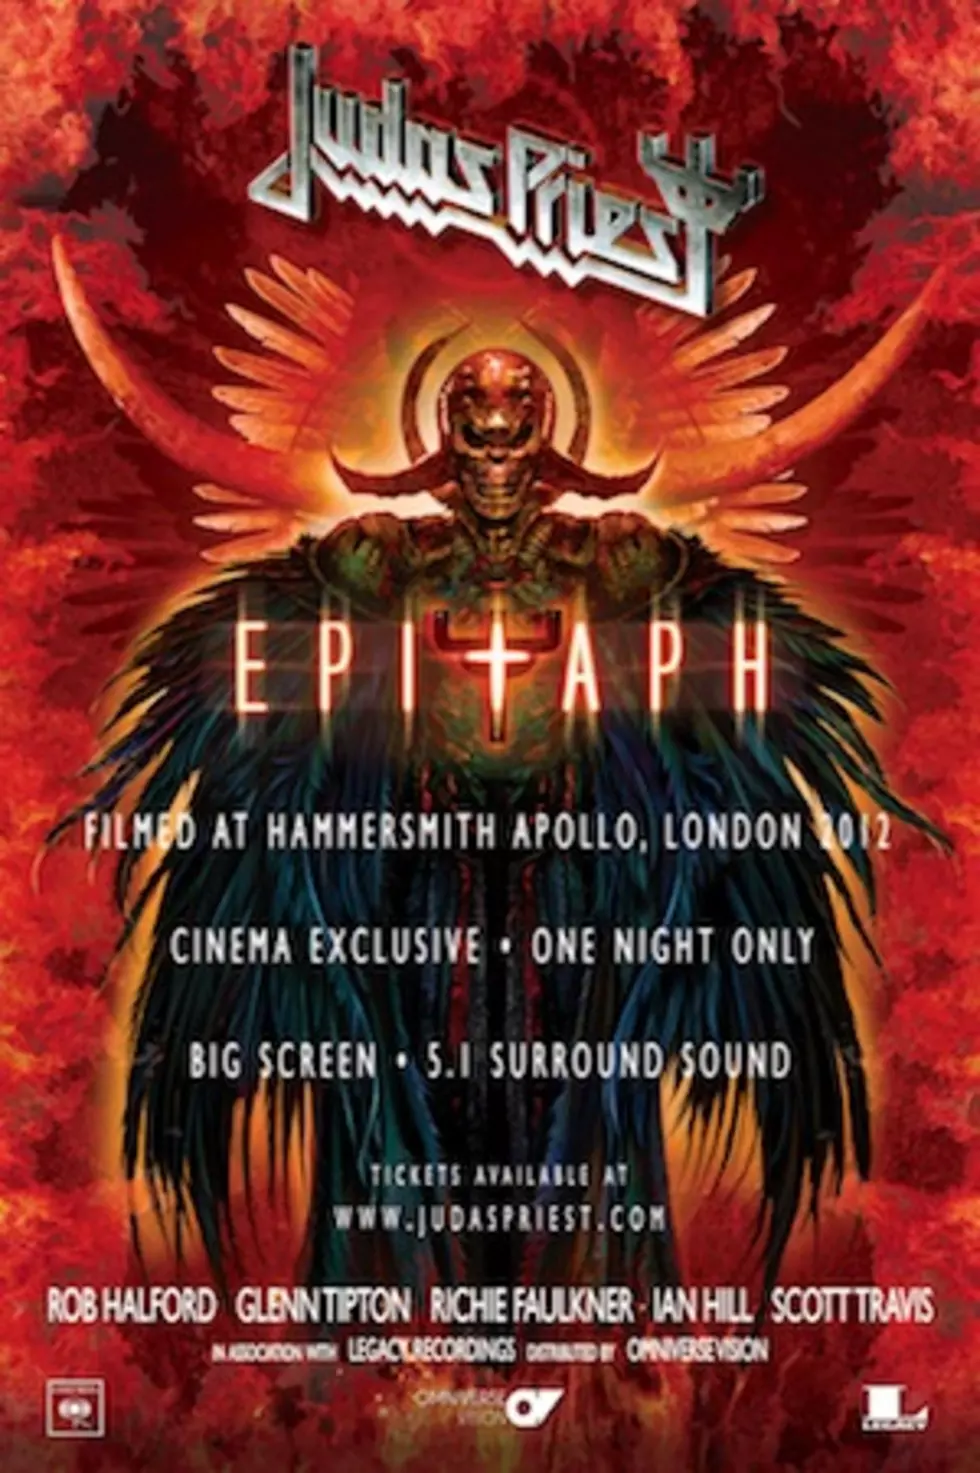 Judas Priest to Offer Special Worldwide Screenings of New Concert DVD &#8216;Epitaph&#8217;